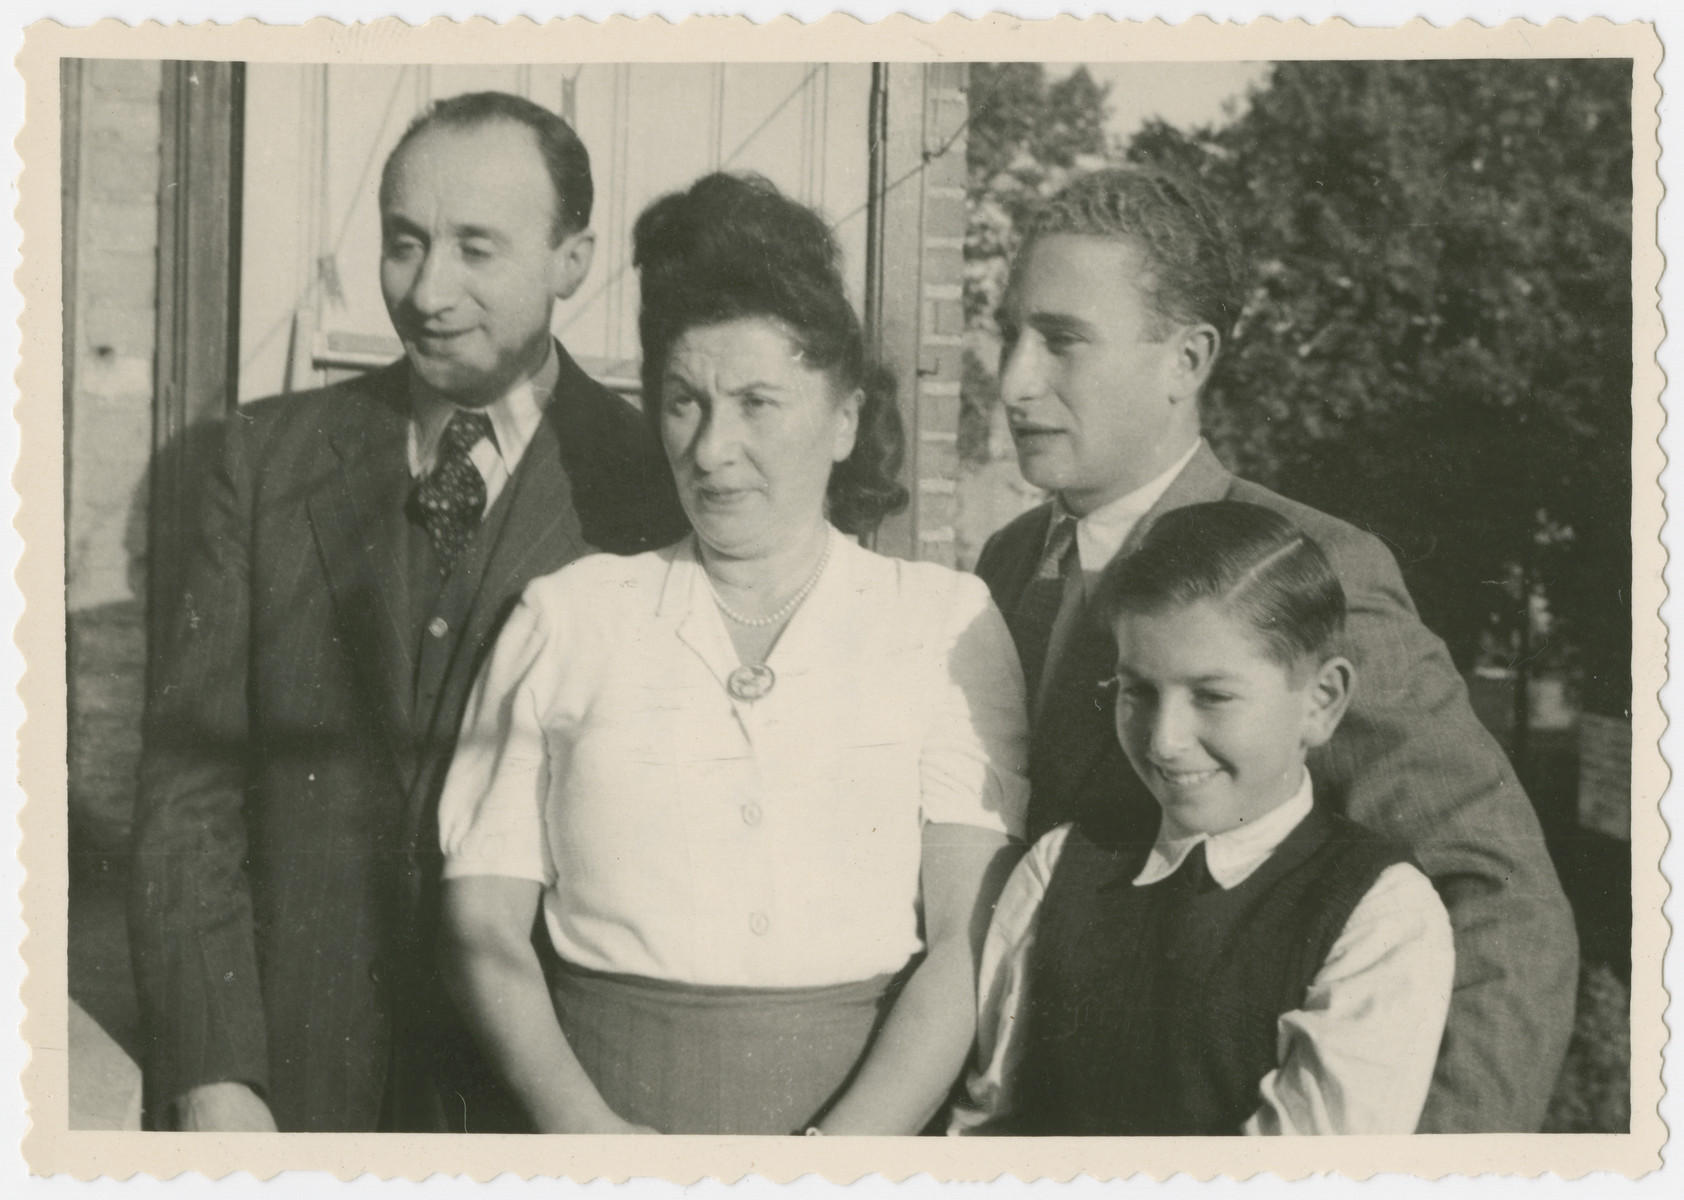 Portrait of the Elbaum/Nusbaum family in their home in Brussels.

From left to right are Chiel Elbaum (the donor's step-father), Regina Nusbaum Elbaum (the donor's mother), Chaim Elbaum (the donor's step-brother) and Mark Nusbaum.